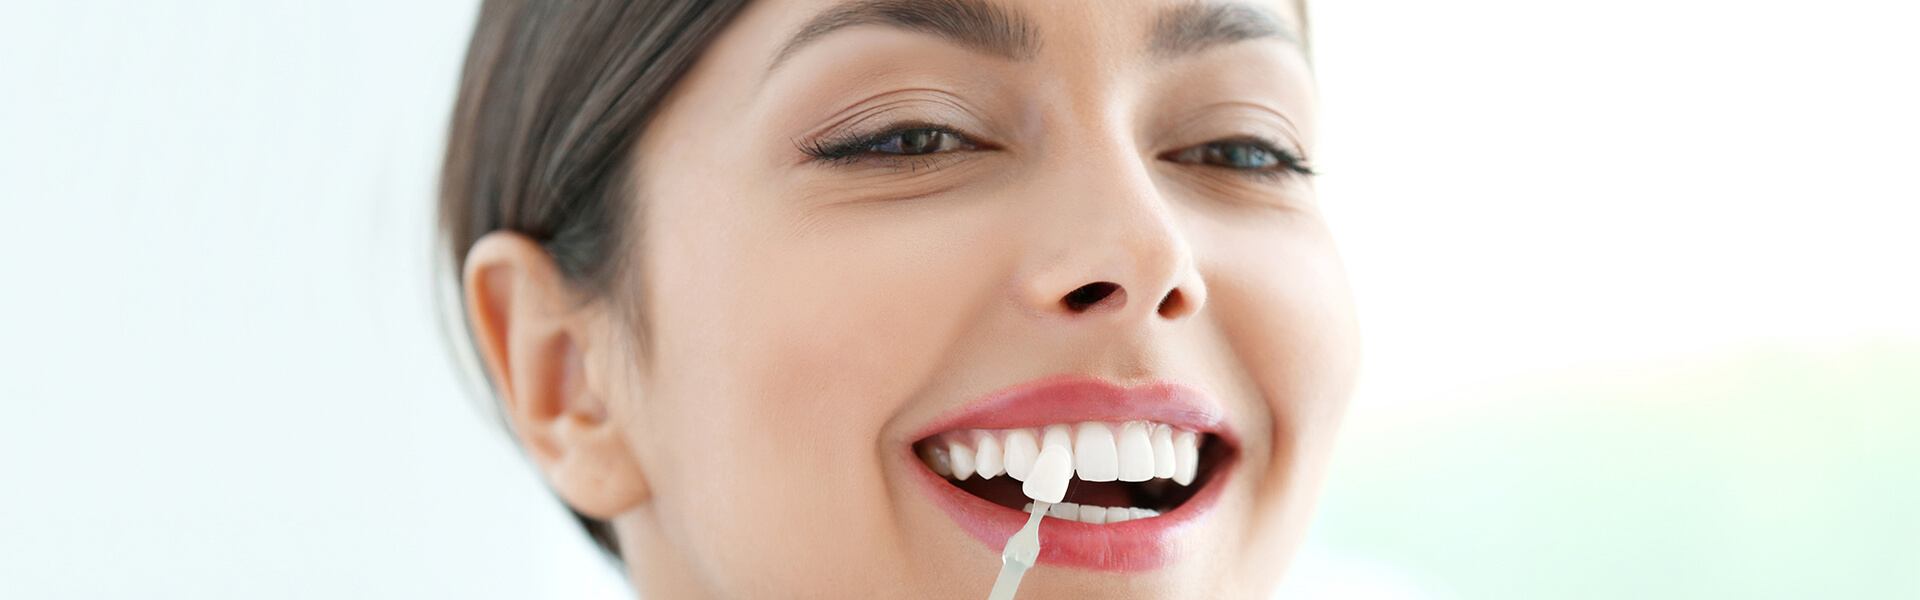 Dental Crowns in Mississauga, ON